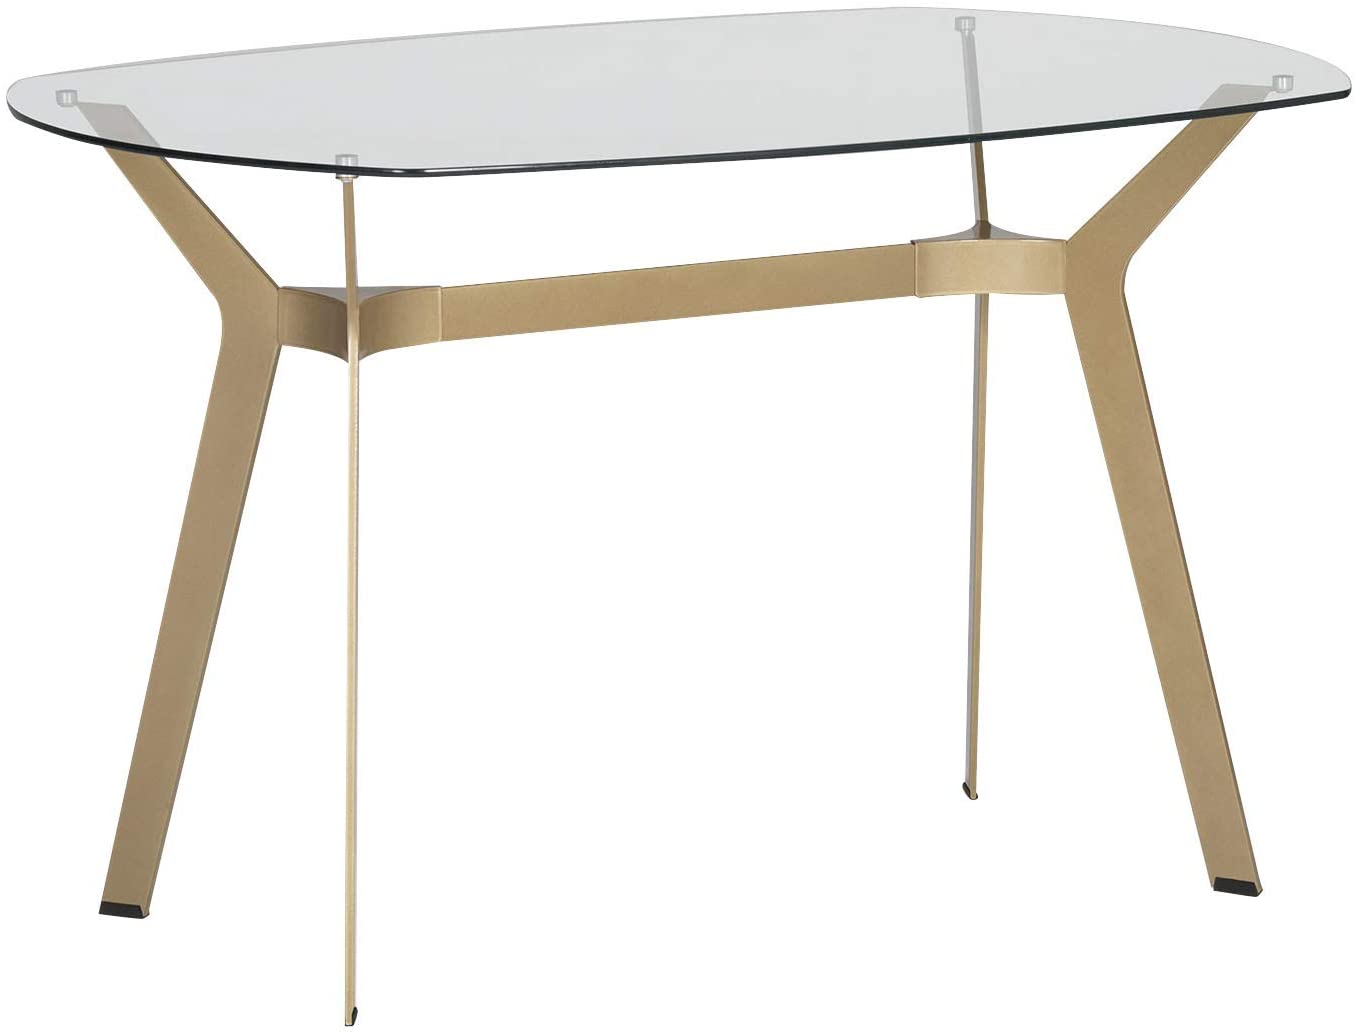 B07L6L4SLP Studio Designs Home Archtech 60" W x 32" D Mid-Century Modern Dining, Desk, Metal and 8mm Thick Glass Table in Gold